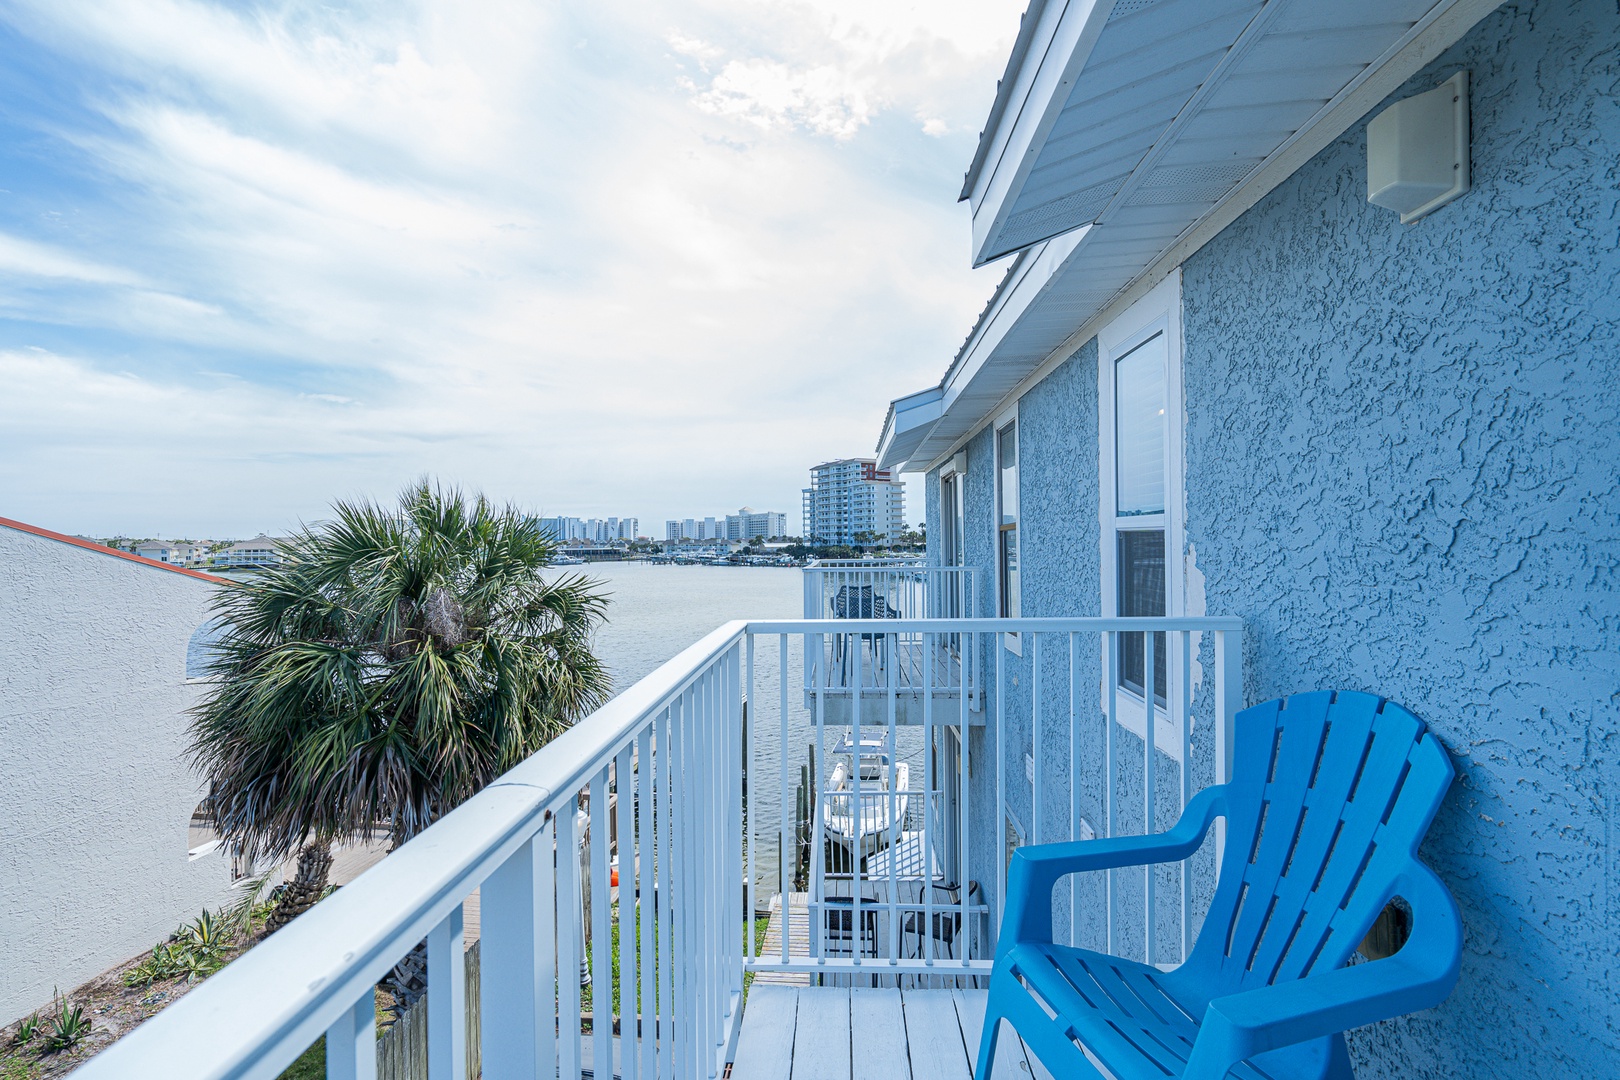 Step out onto the 3rd-floor balcony & take in the fresh air with water views